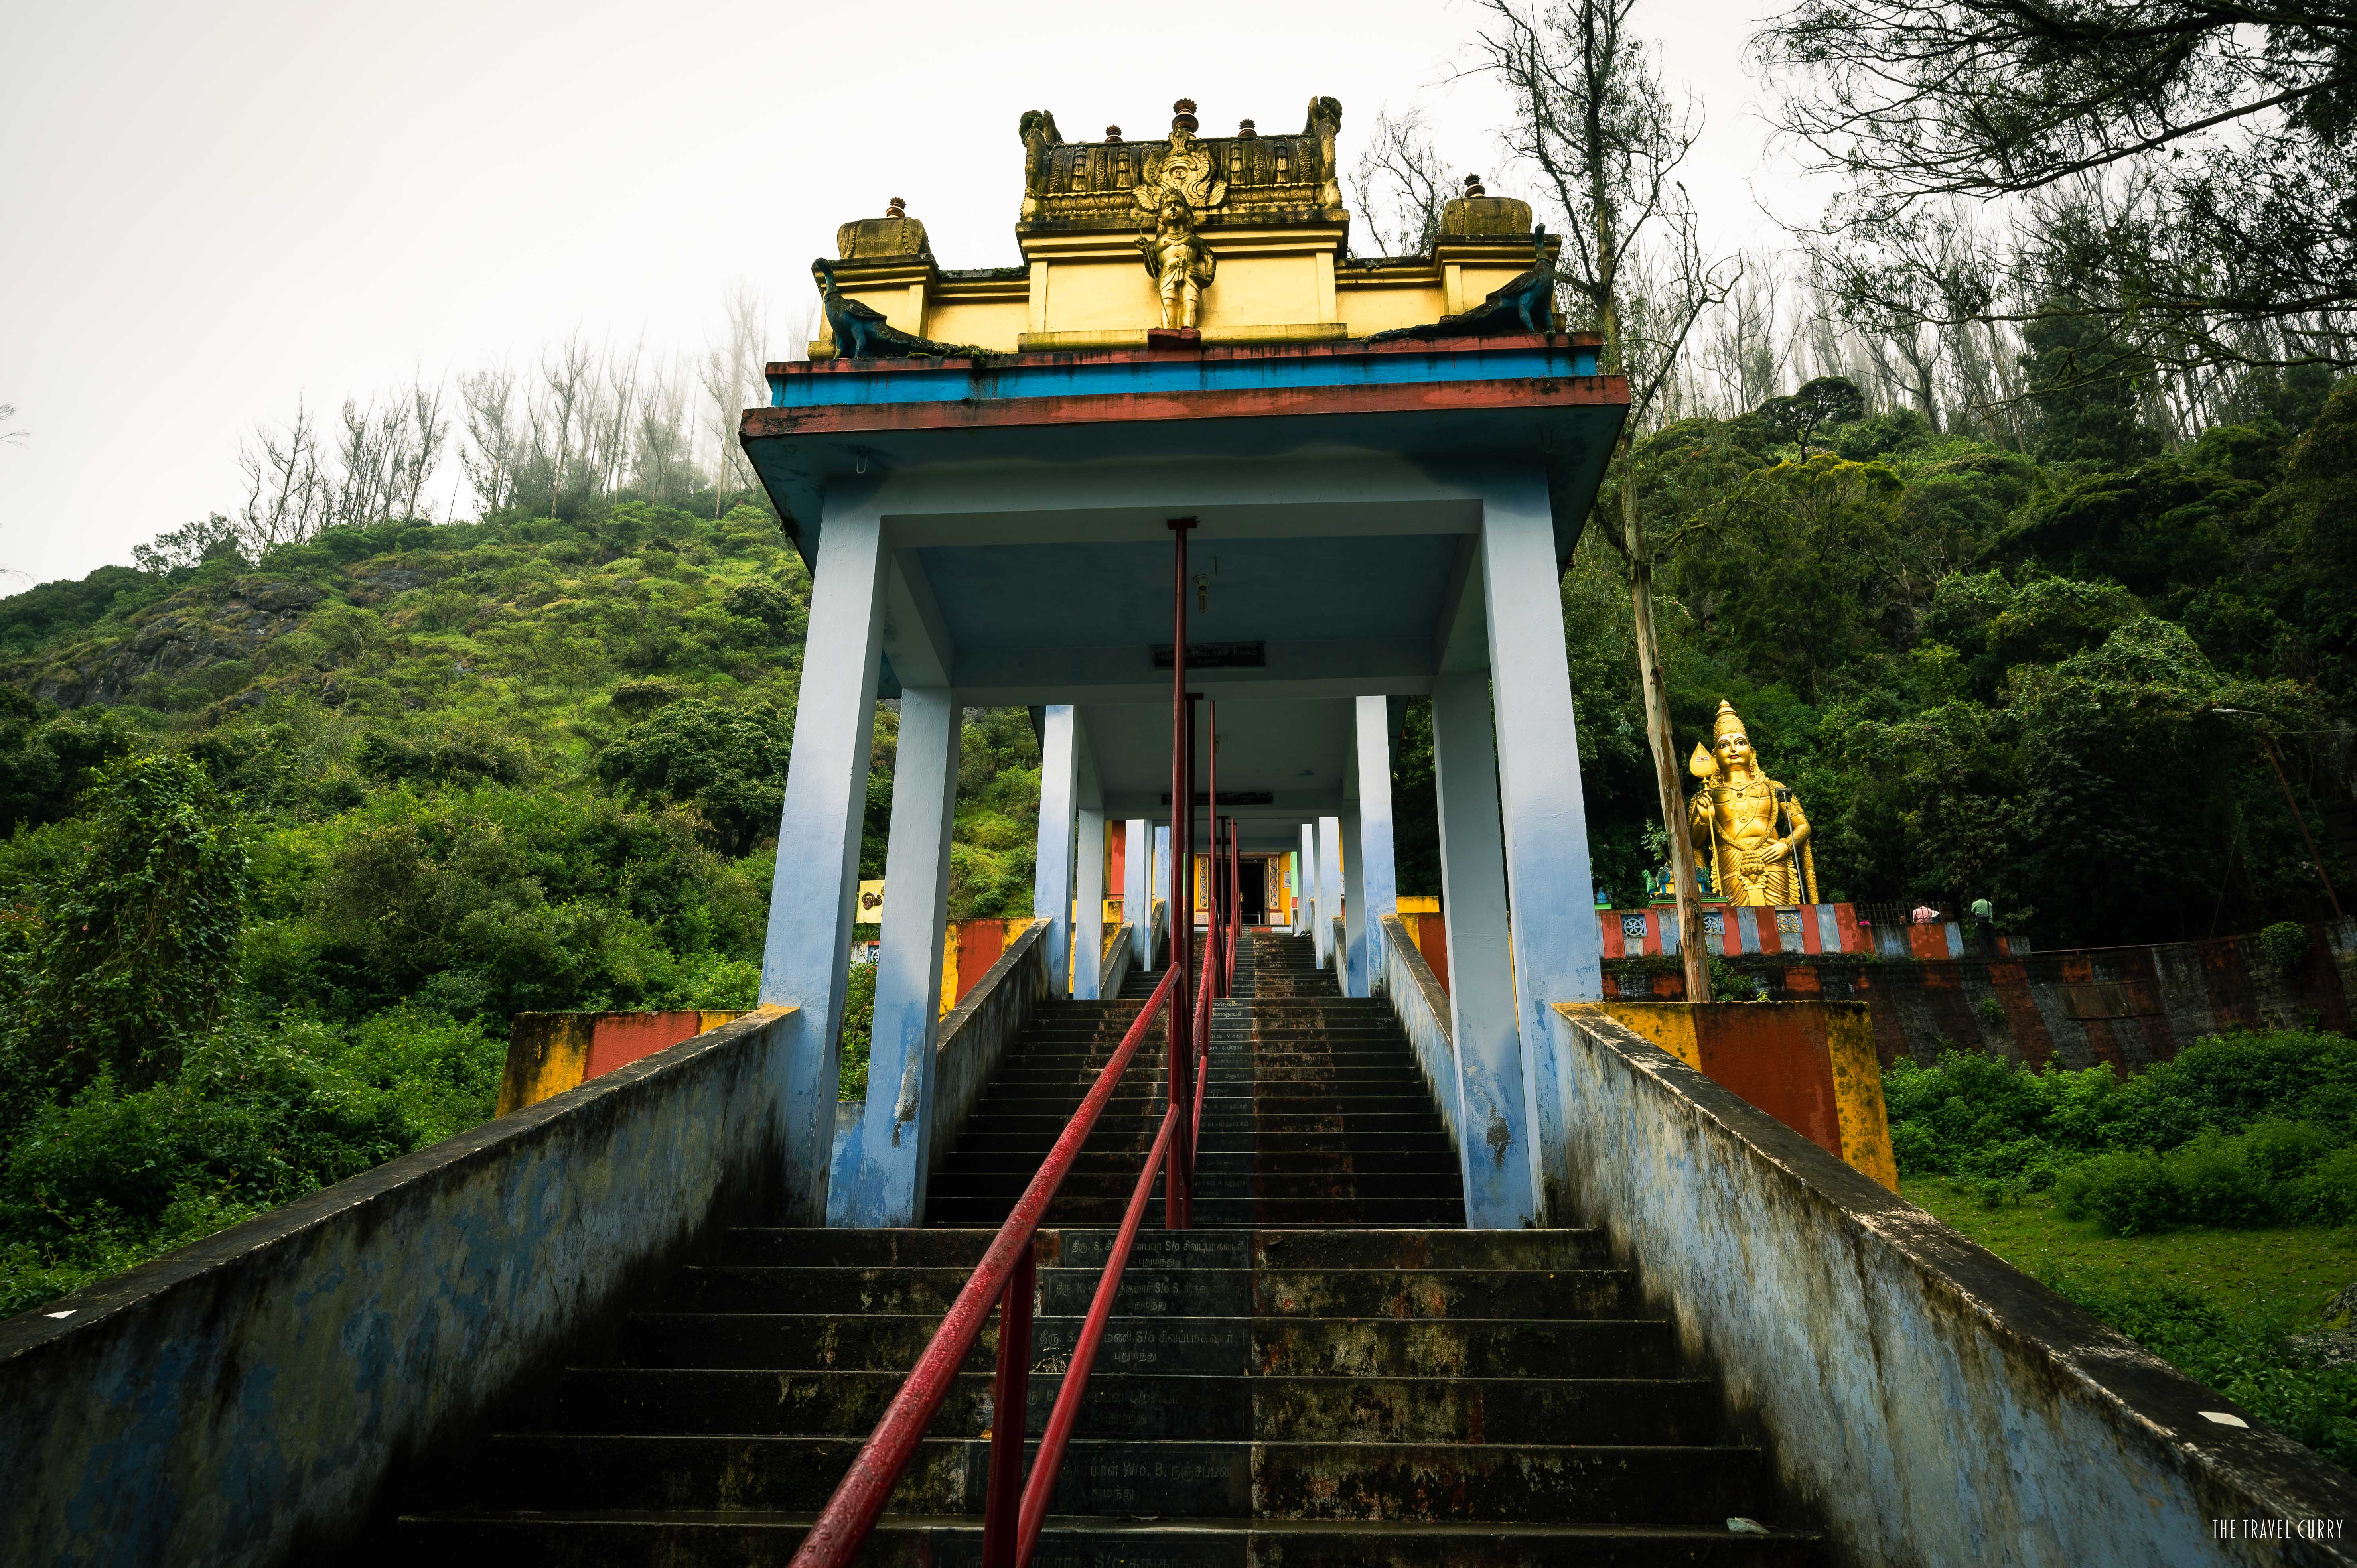 300 steps leading to the Murugan Temple entrance